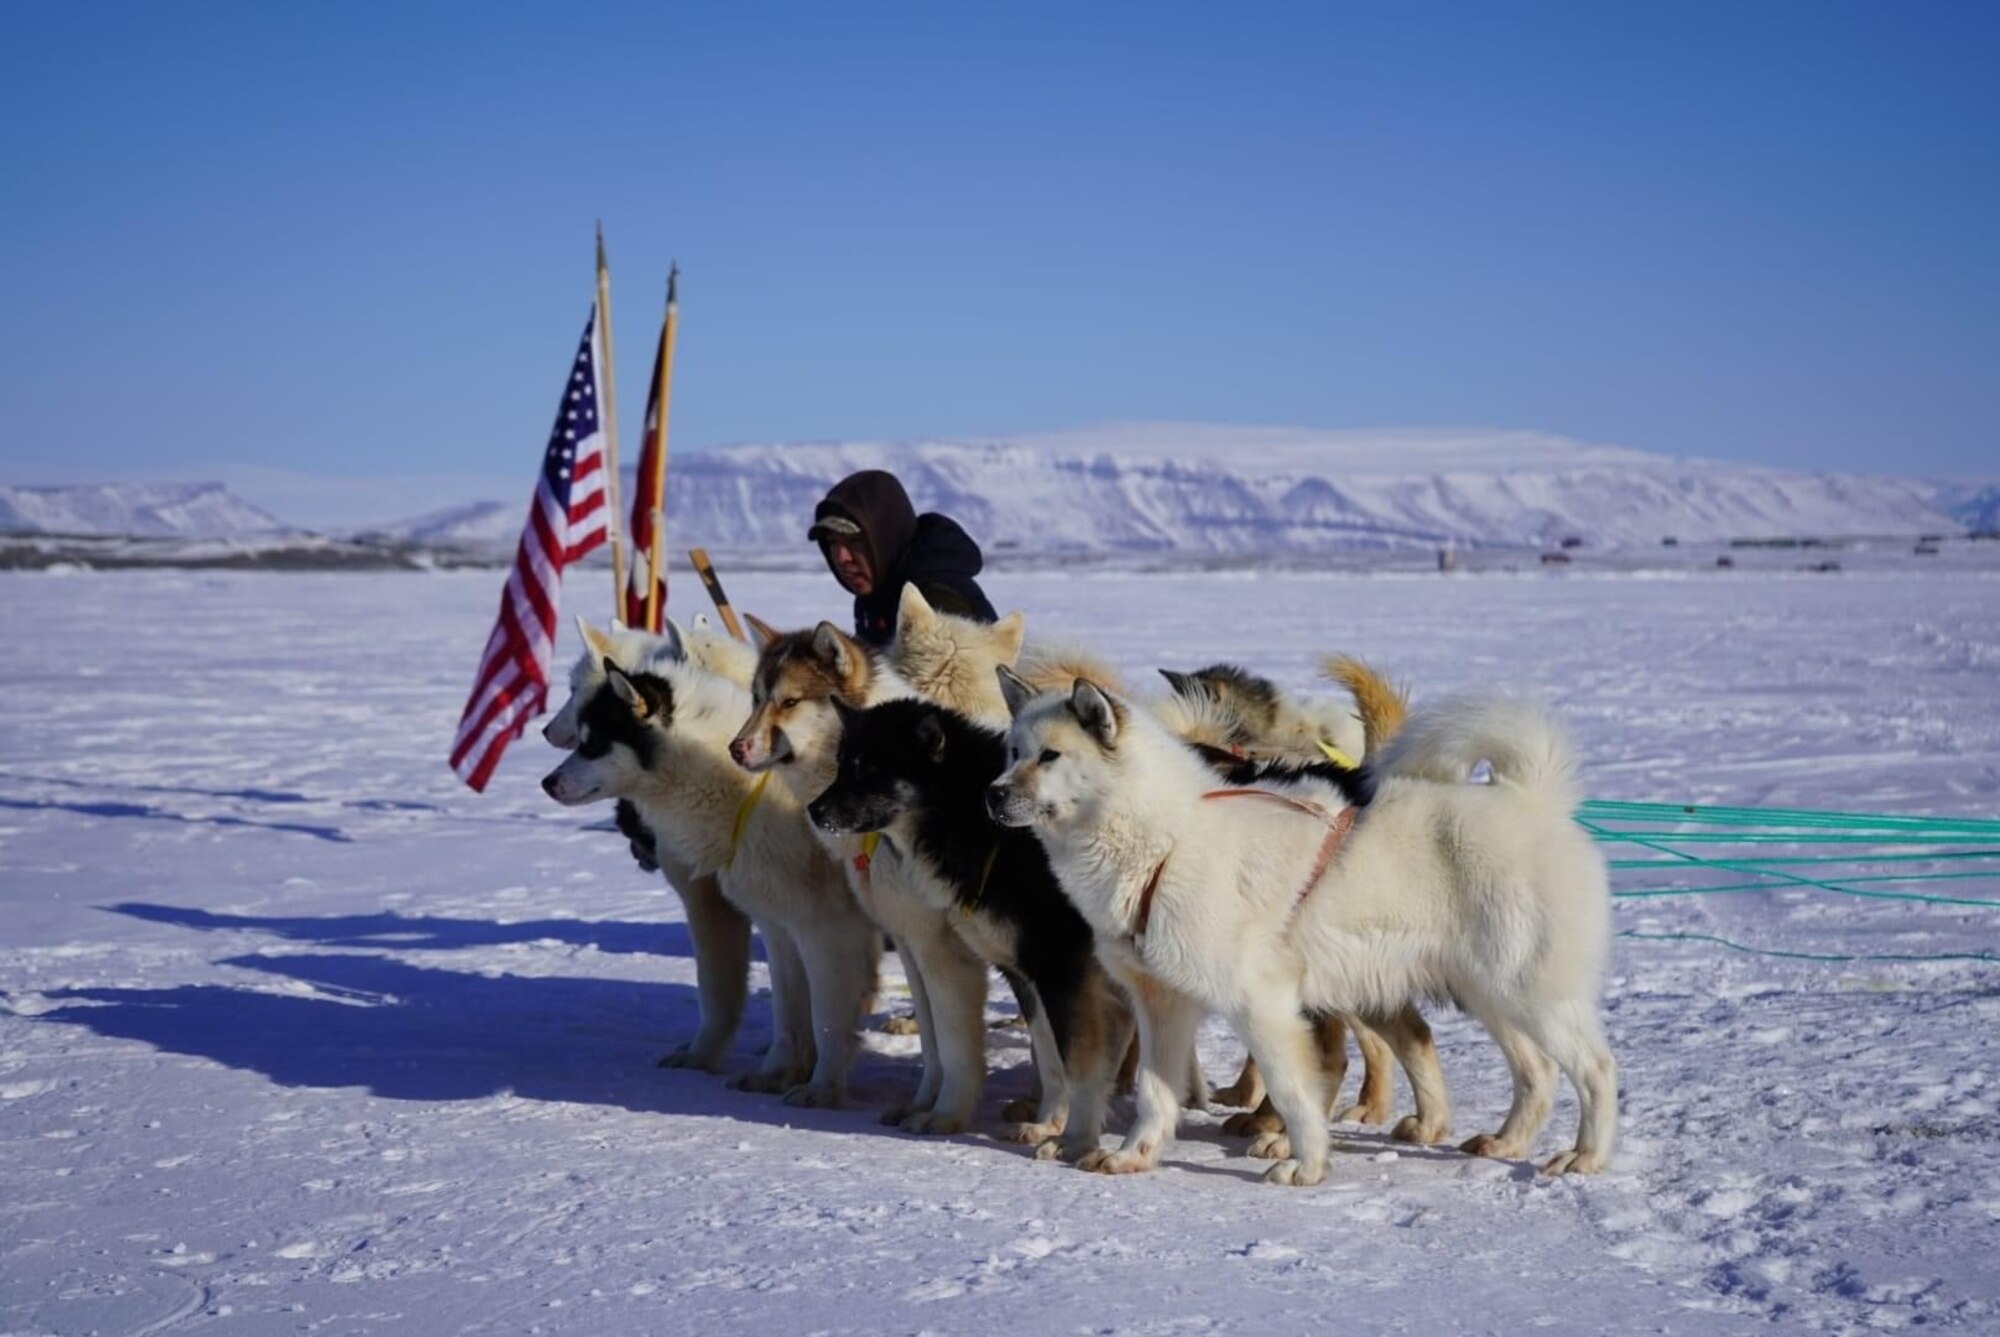 A Greenland local prepares his dogs for a dog sledding race